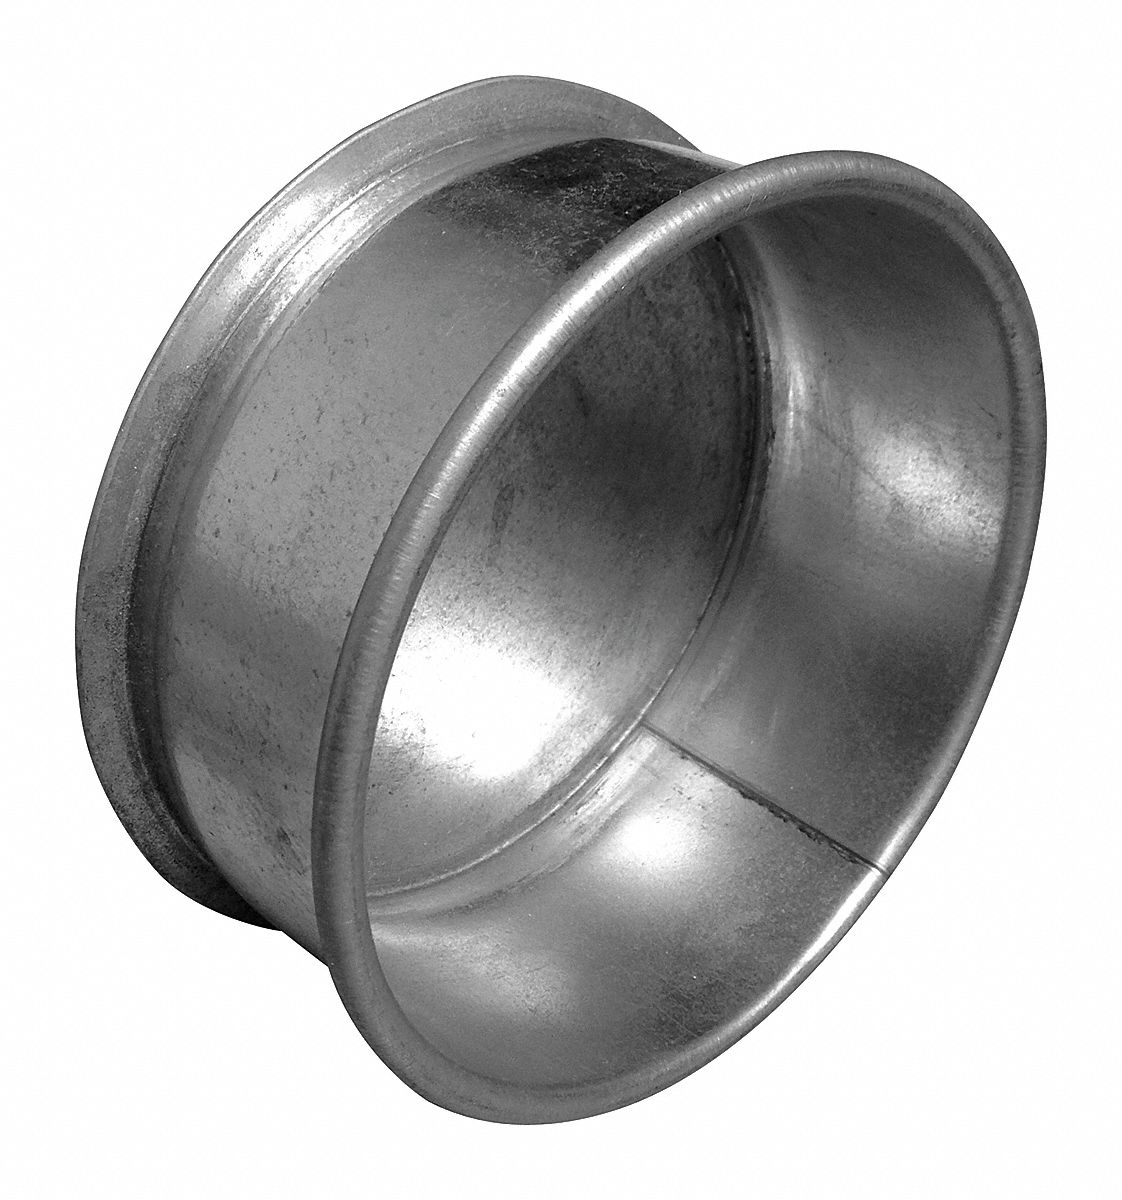 Nordfab Galvanized Steel End Cap 8 In Duct Fitting Diameter 2 In Duct Fitting Length 29rn68 